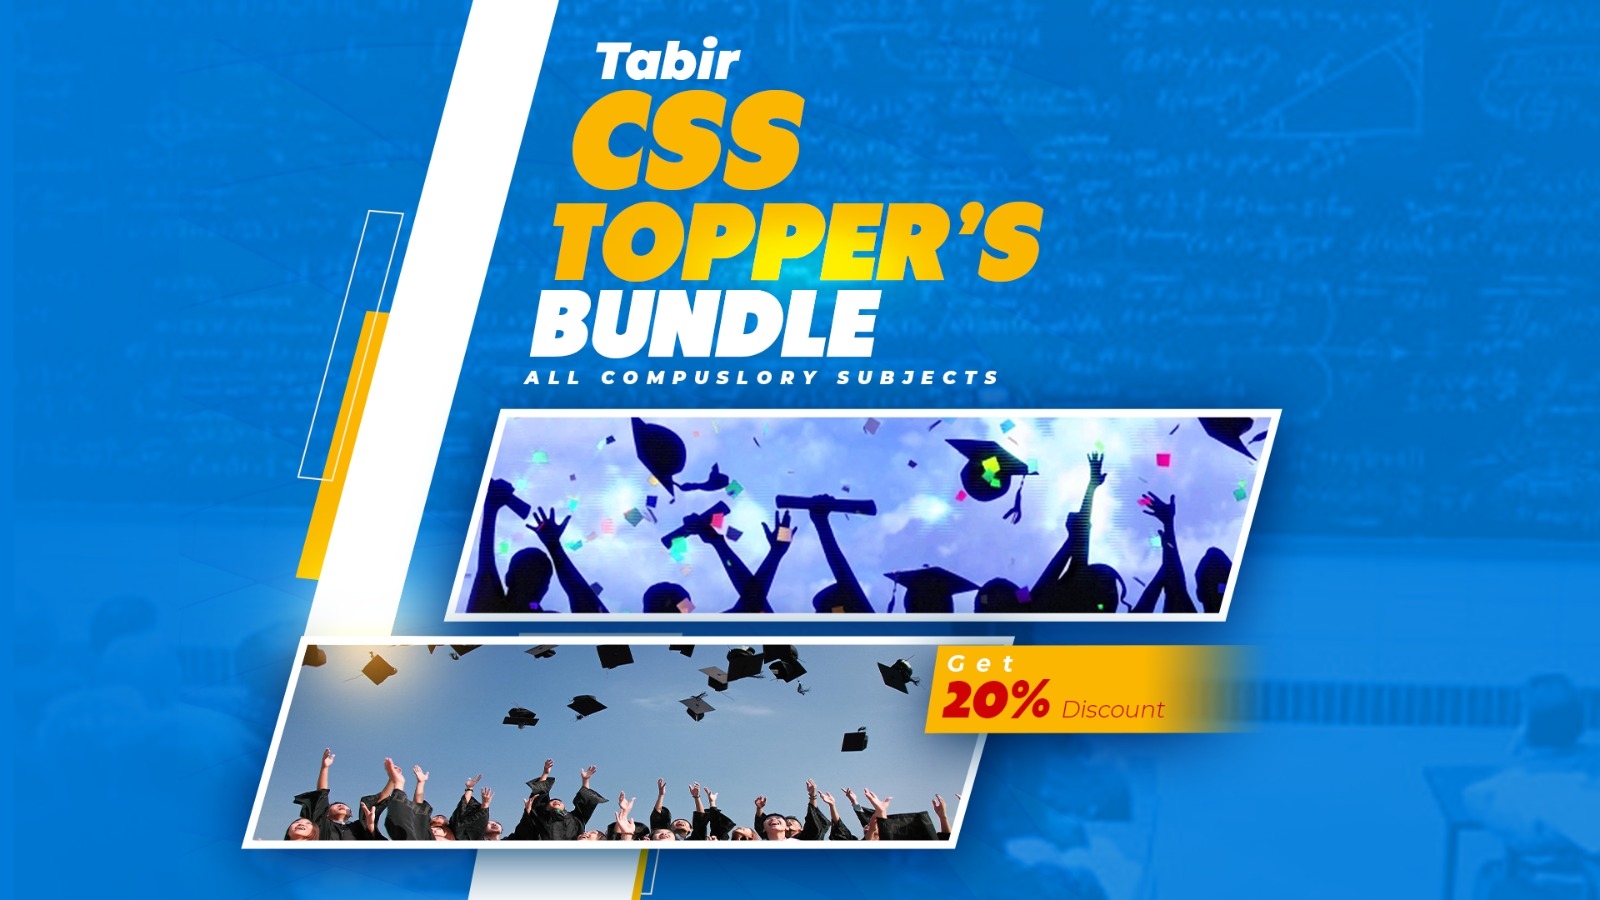 CSS Compulsory Subjects Topper's Bundle